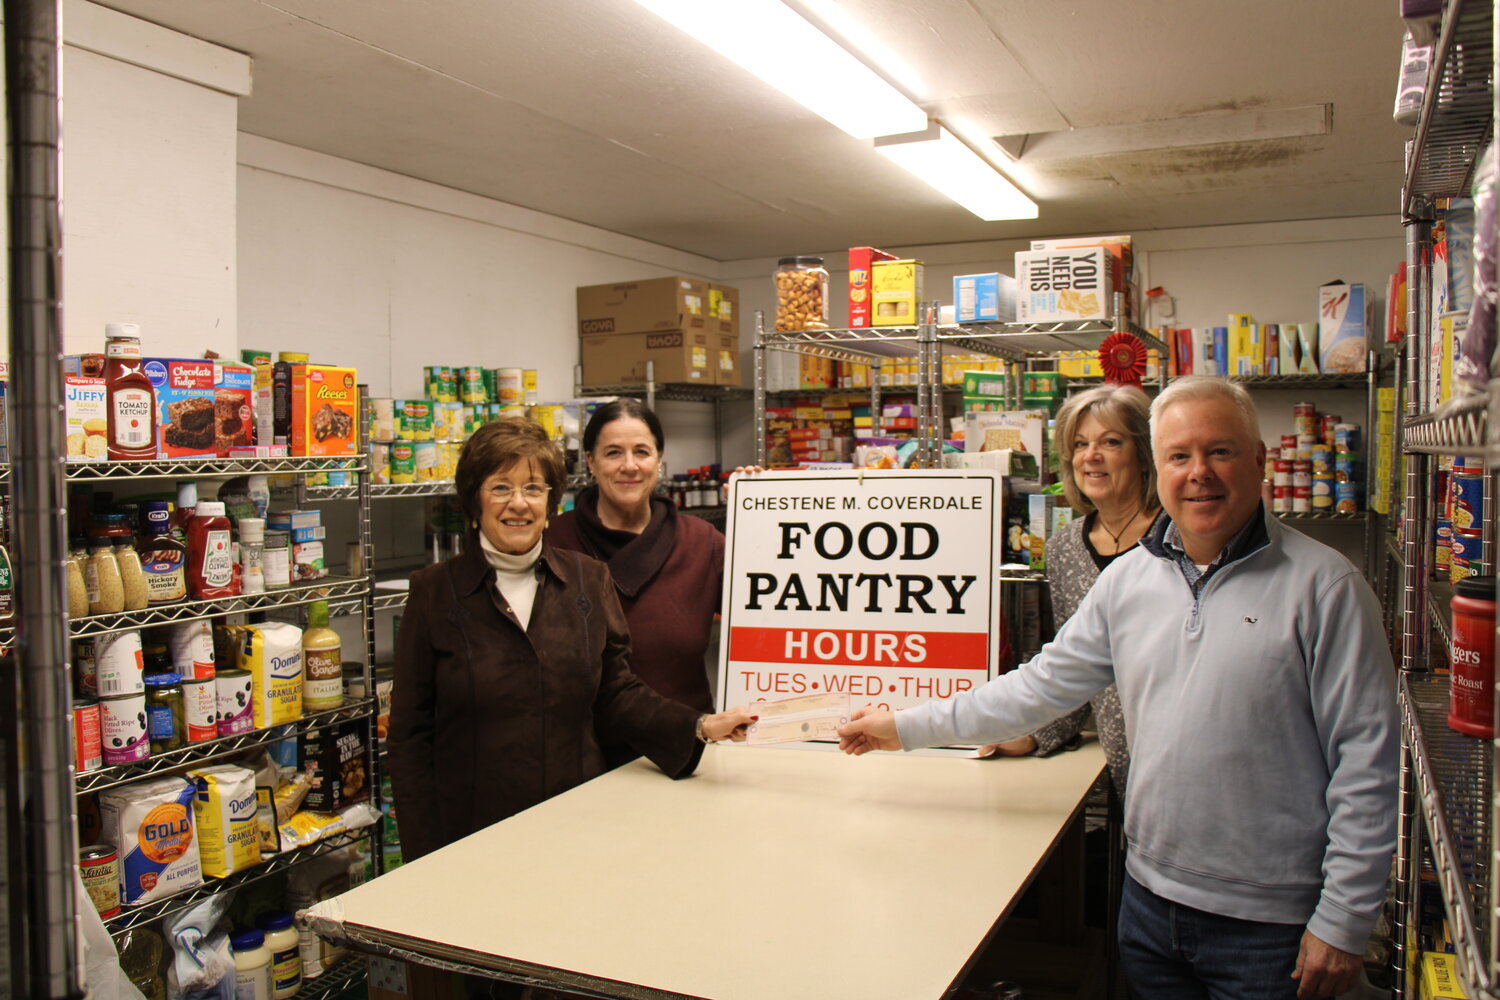 Suffolk County News publisher Terry Tuthill presents Charlene Lehmann, director of the Chestene M. Coverdale Pantry in Sayville, with a donation from the paper’s Holiday Greeting Fund. Also pictured are volunteers Sarah Isaacson (left) and Mary O’Connor (right).